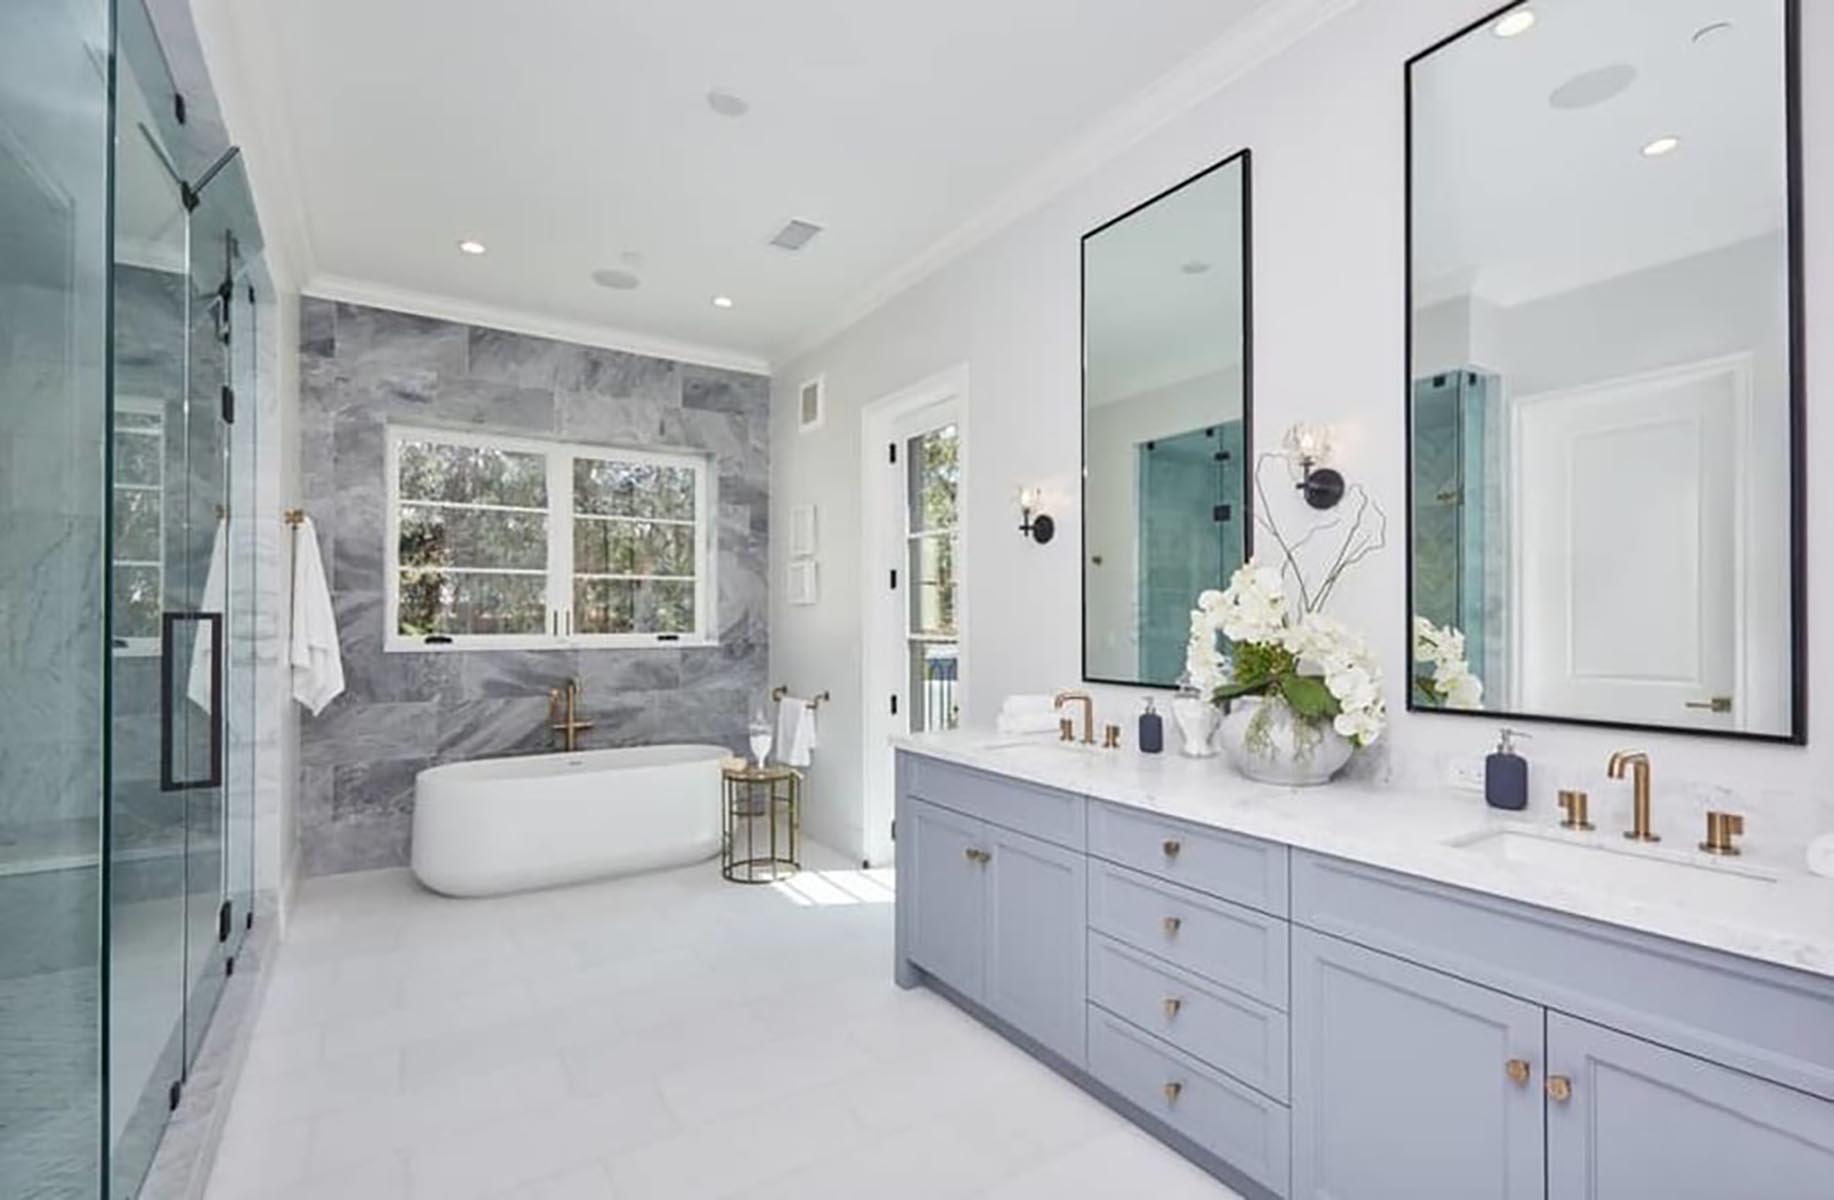 Architect home addition and remodel French contemporary style master bathroom 1